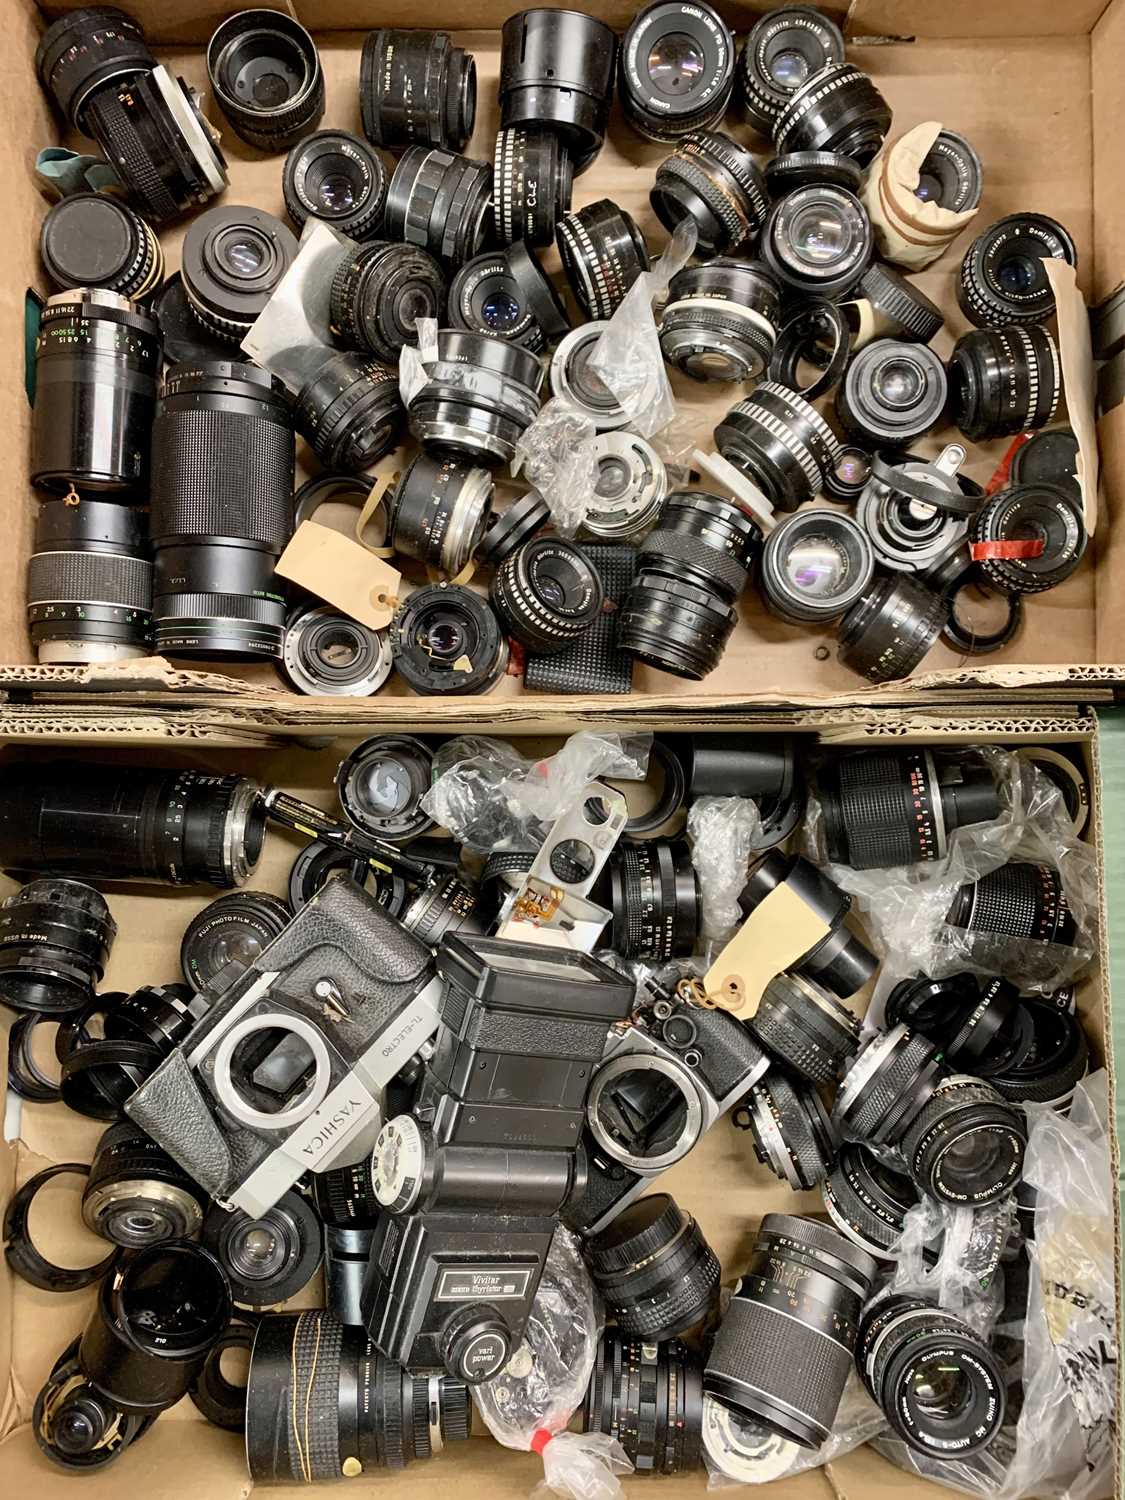 CAMERA PARTS & SPARES - a large collection including bodies, lenses and other small pieces, - Image 4 of 5